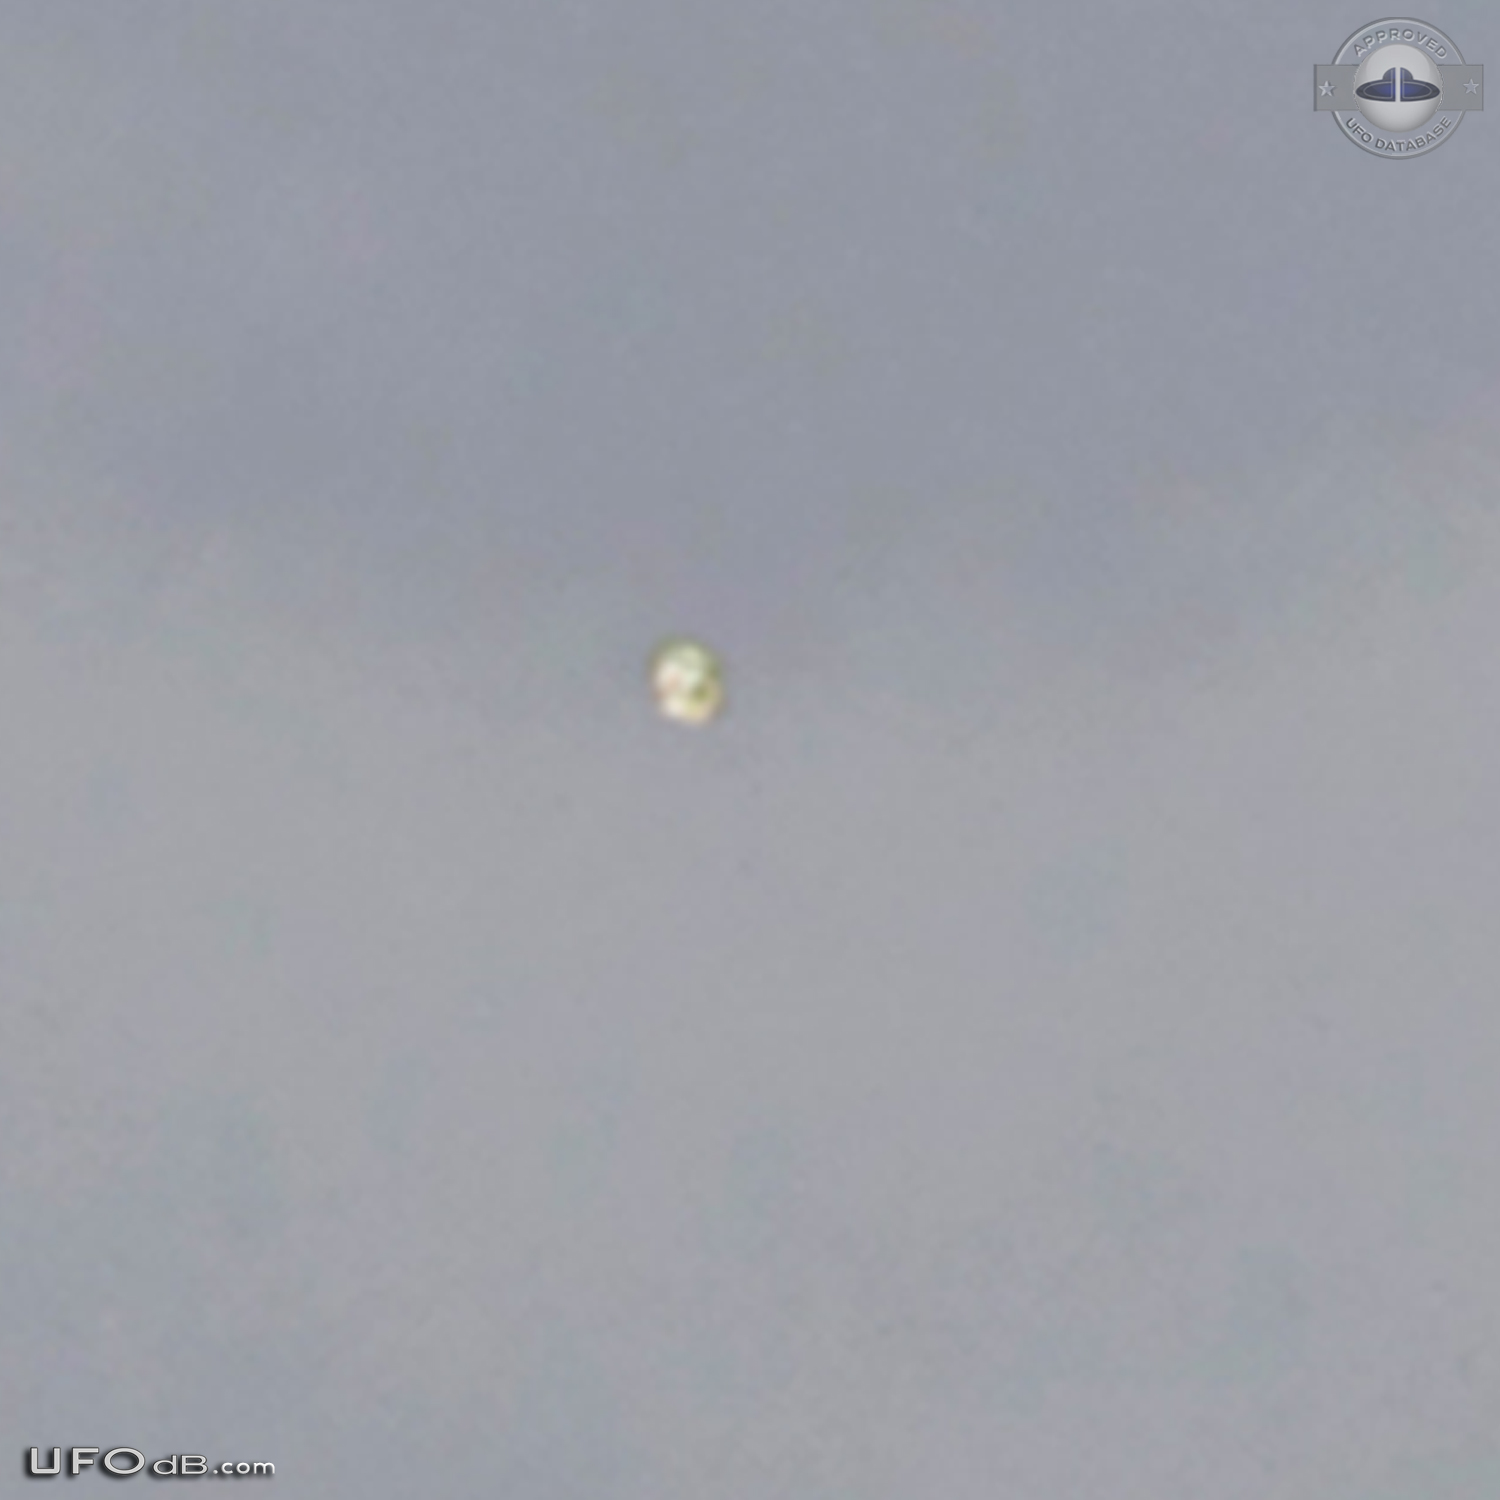 Two UFOs near Tango 01 the airplane of the Argentina president in 2012 UFO Picture #574-4